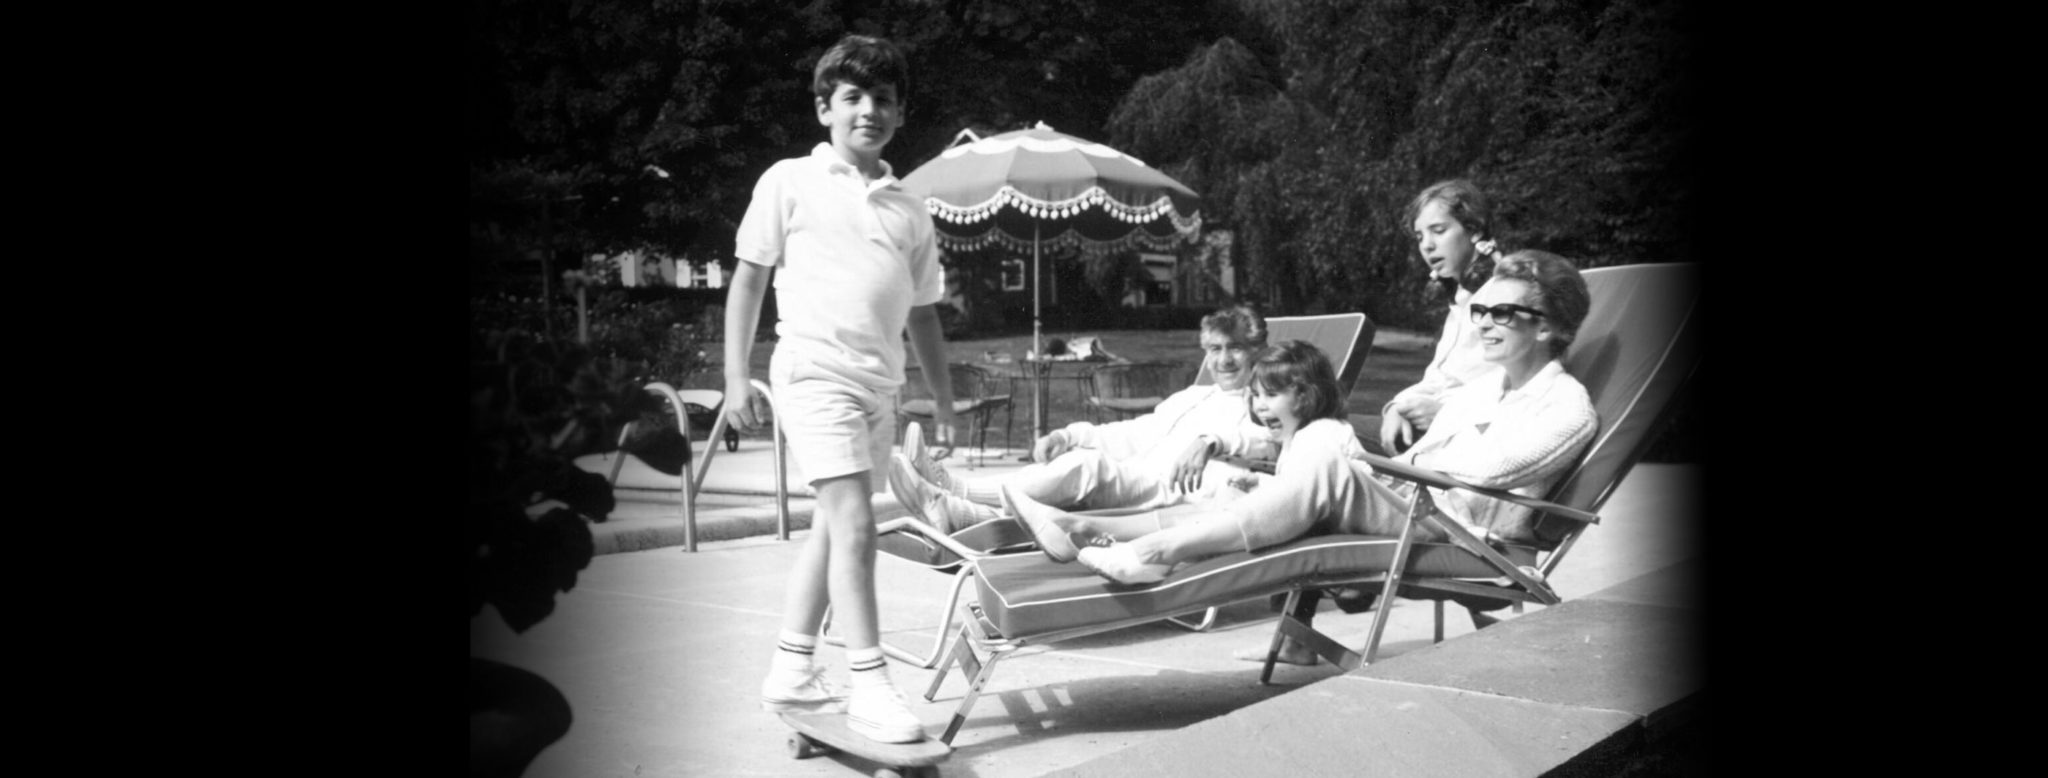 Bernstein with Alexander, Nina, Jamie and Felicia, poolside, Fairfield, Conn. June. (Credit: Library of Congress, Music Division)